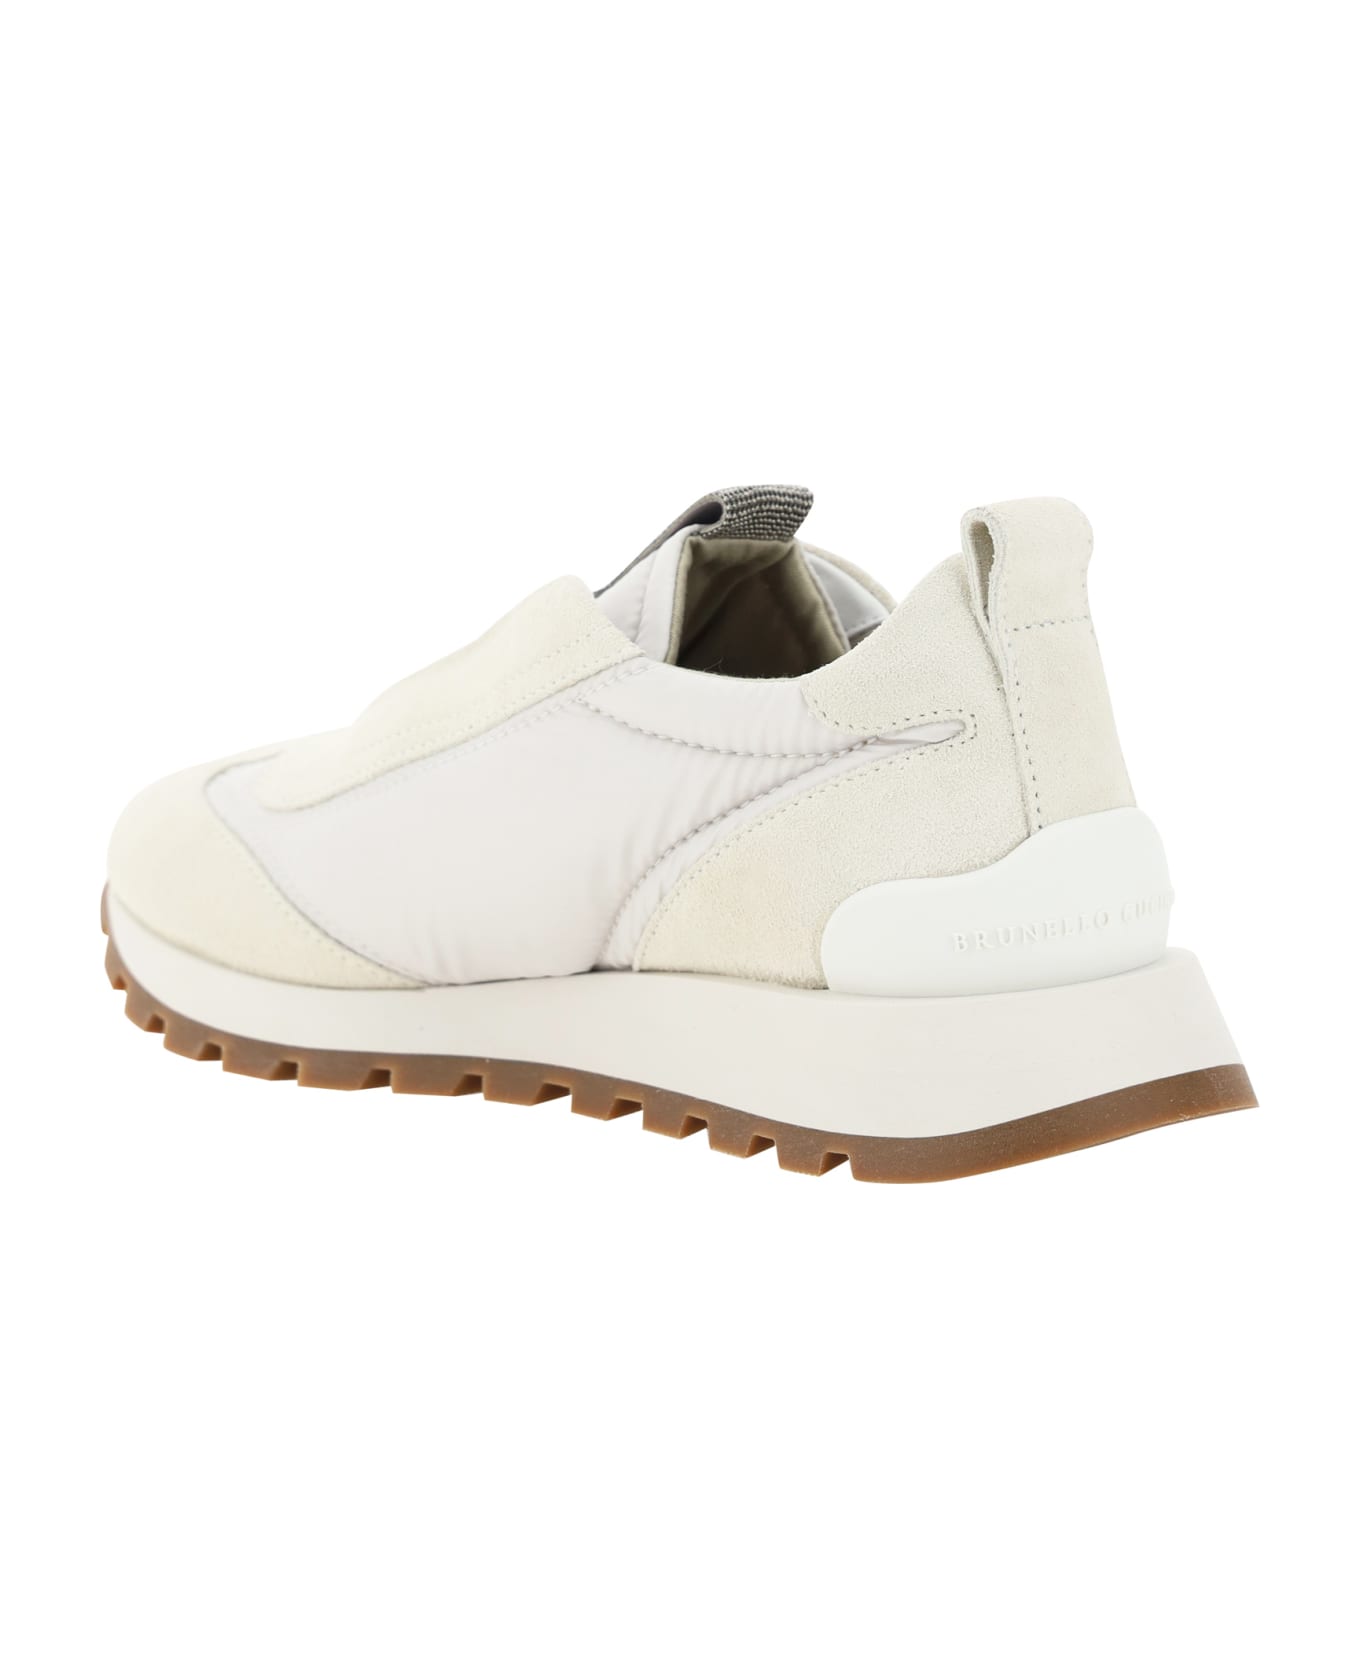 Brunello Cucinelli Embellished Slip-on Sneakers - White